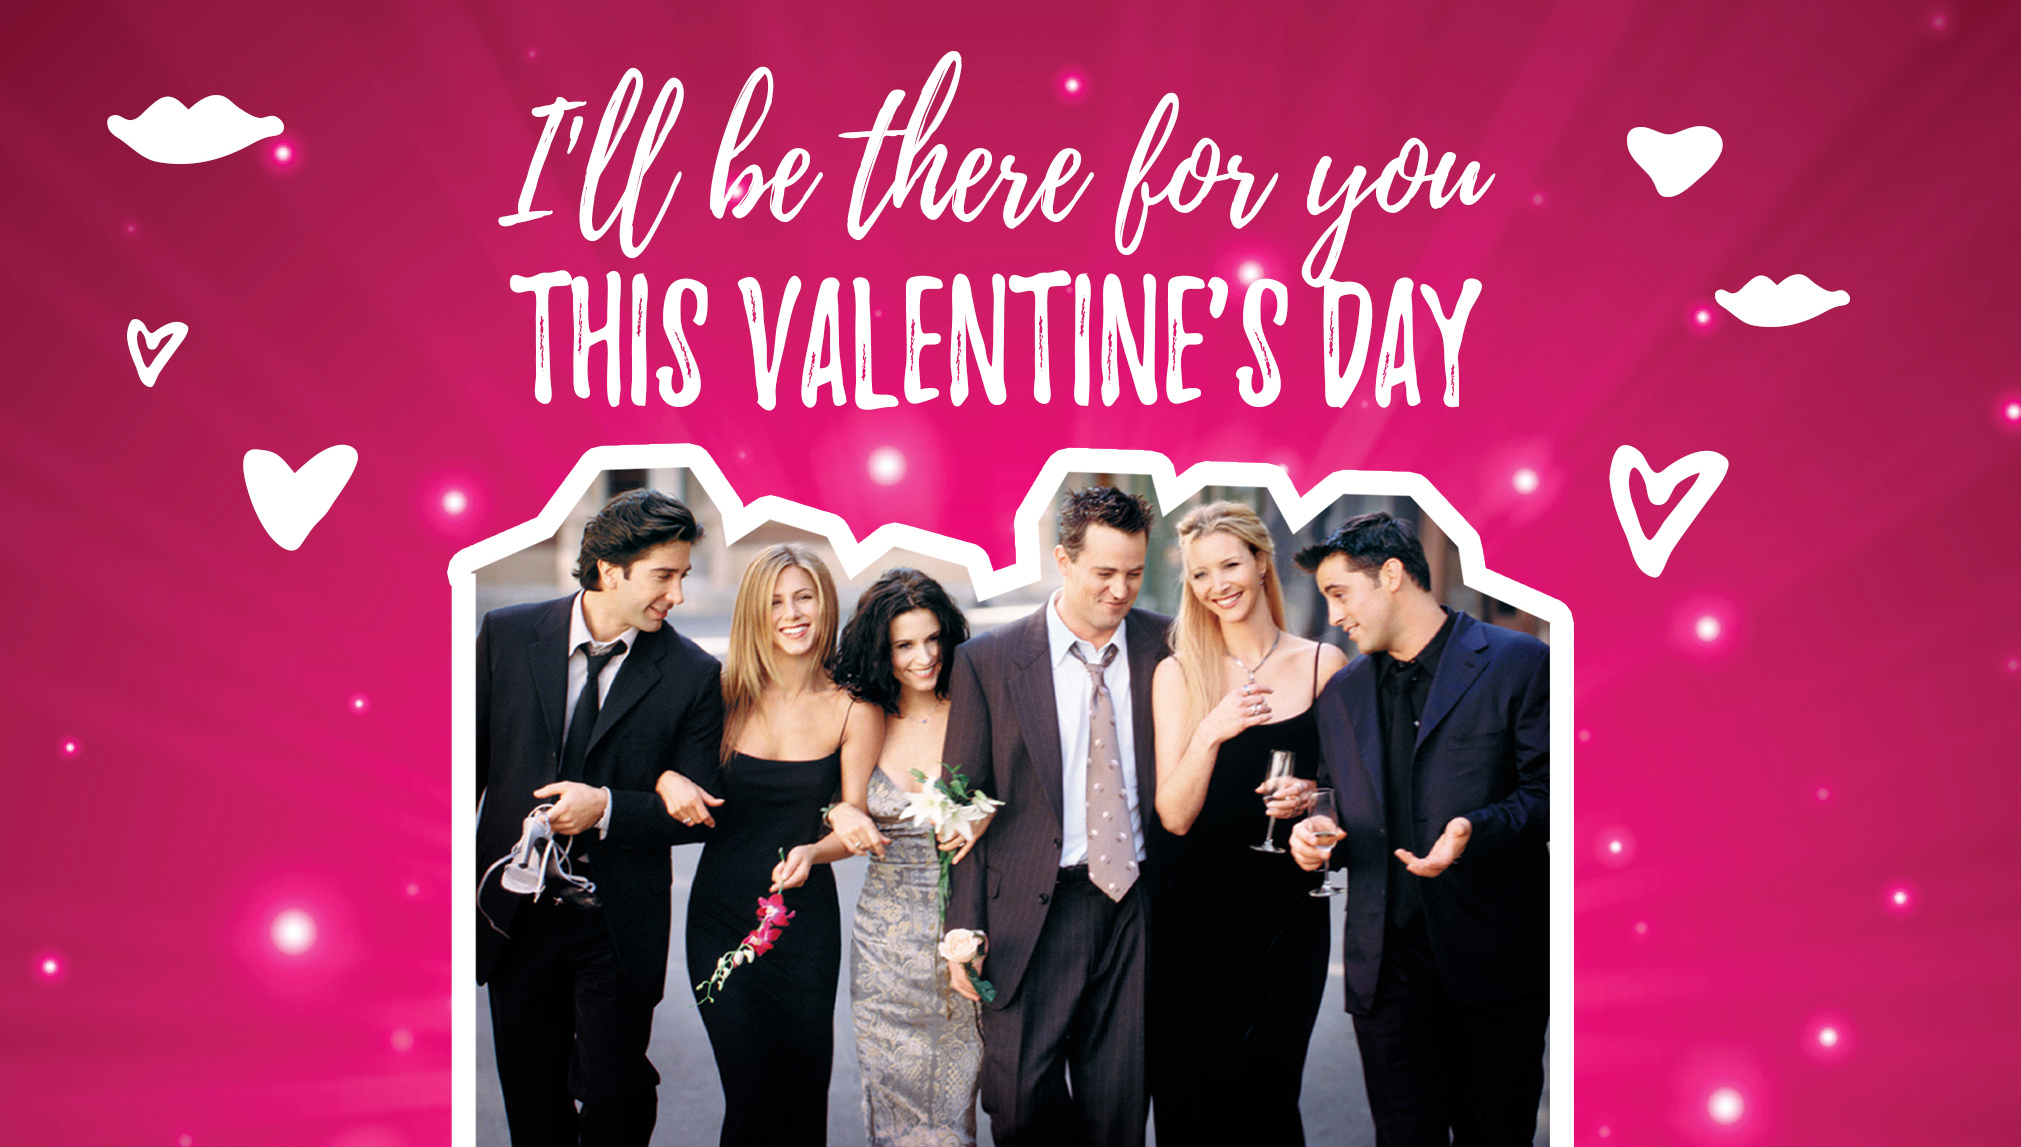 Friends Tv Show Valentine S Day Cards To Send To Your Lobster